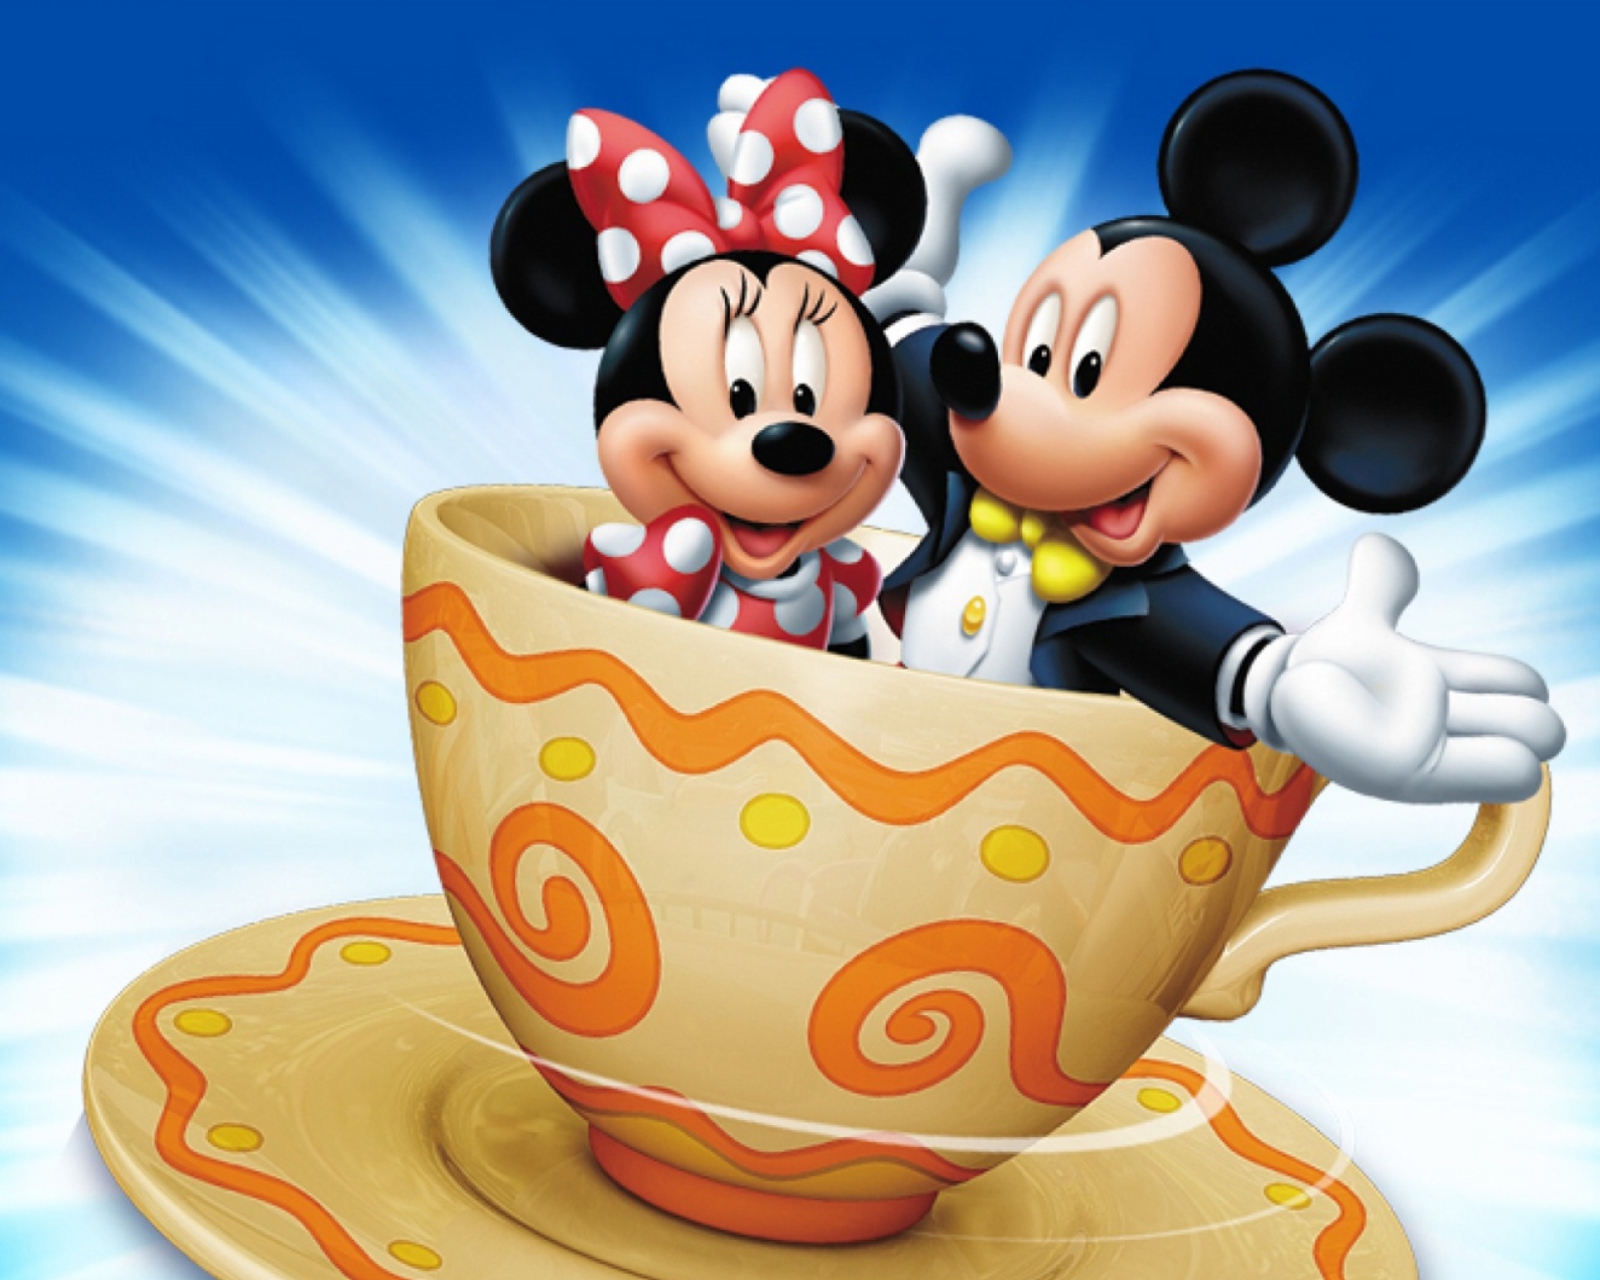 Mickey And Minnie Mouse In Cup wallpaper 1600x1280